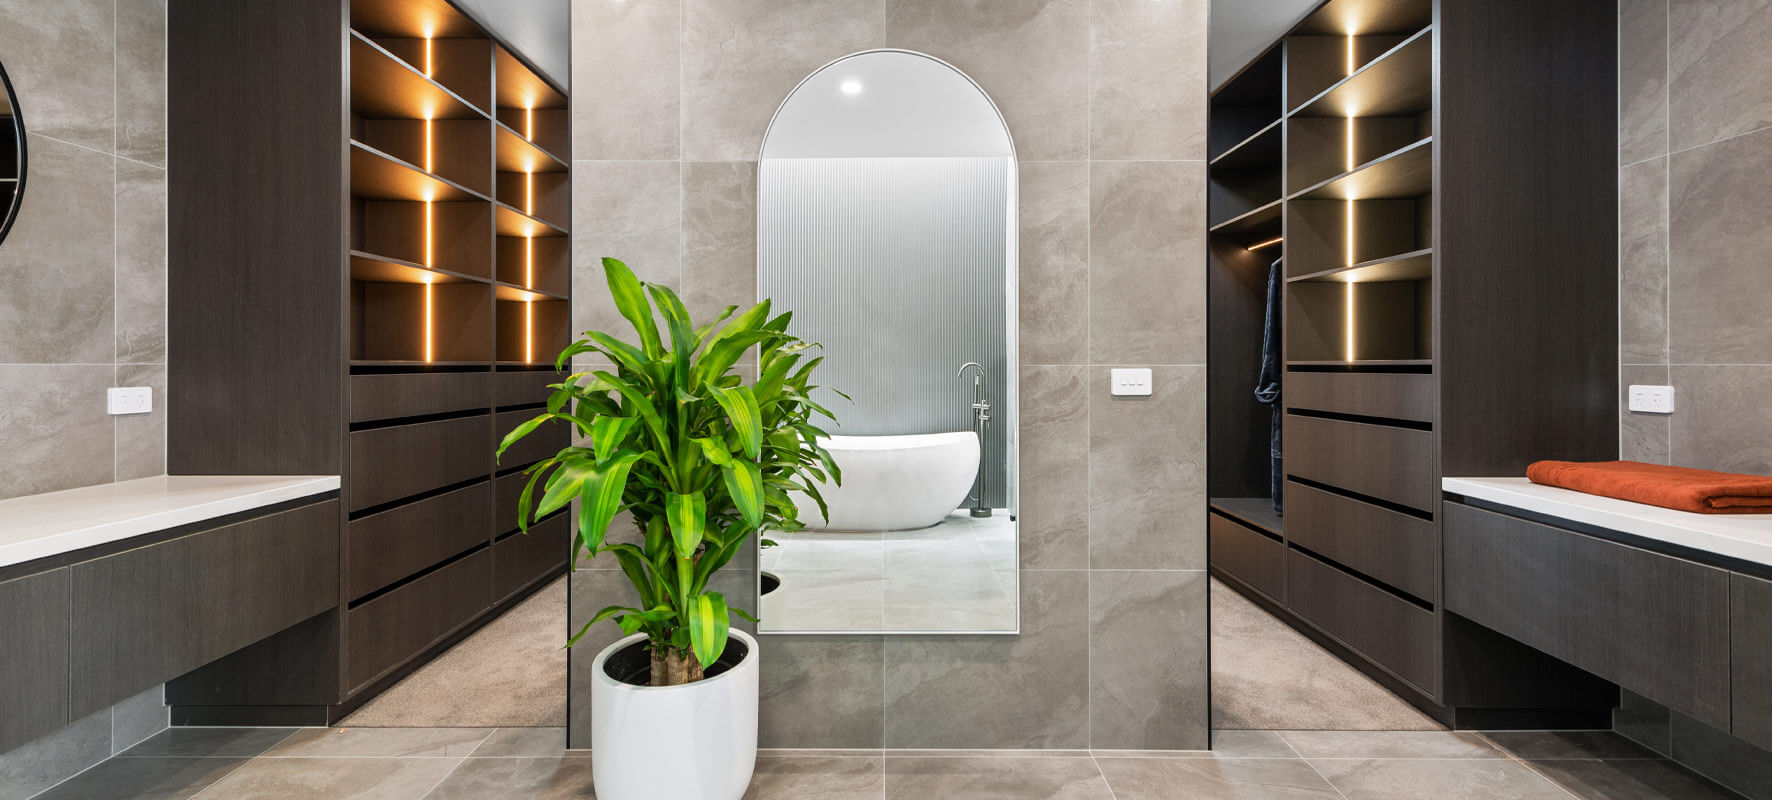 Photo of luxury bathroom ensuite with grey tiles, large full length mirror with rounded top and in the background dark timber wardrobe cabinetry